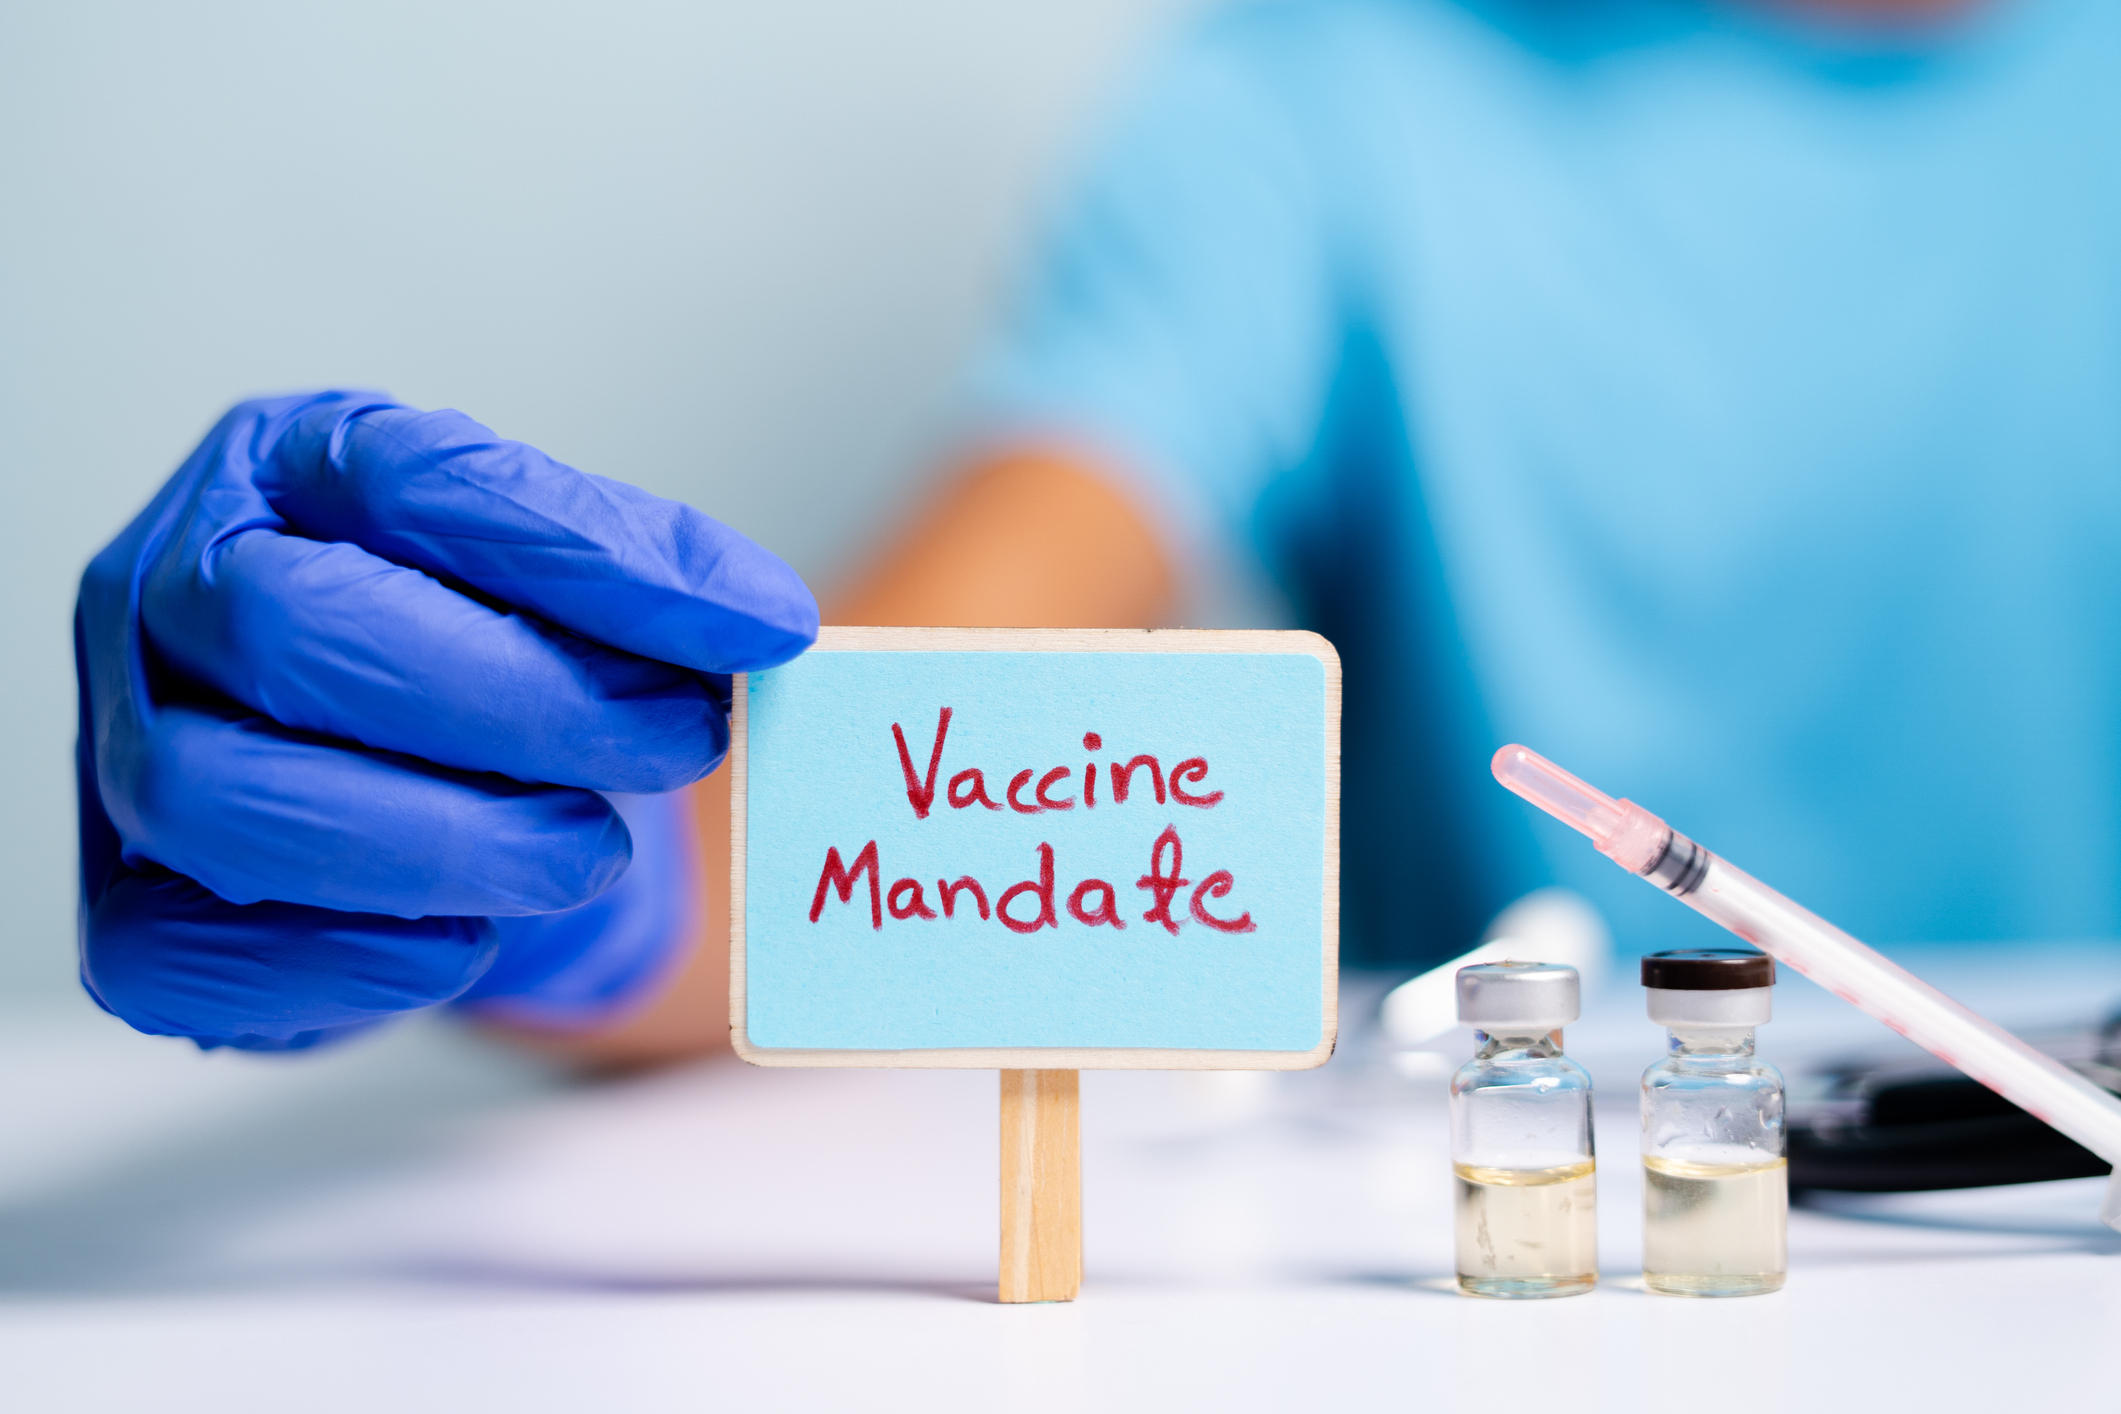 Sixth Circuit Resolves Stay – Enforces OSHA Vaccine and Testing Mandate